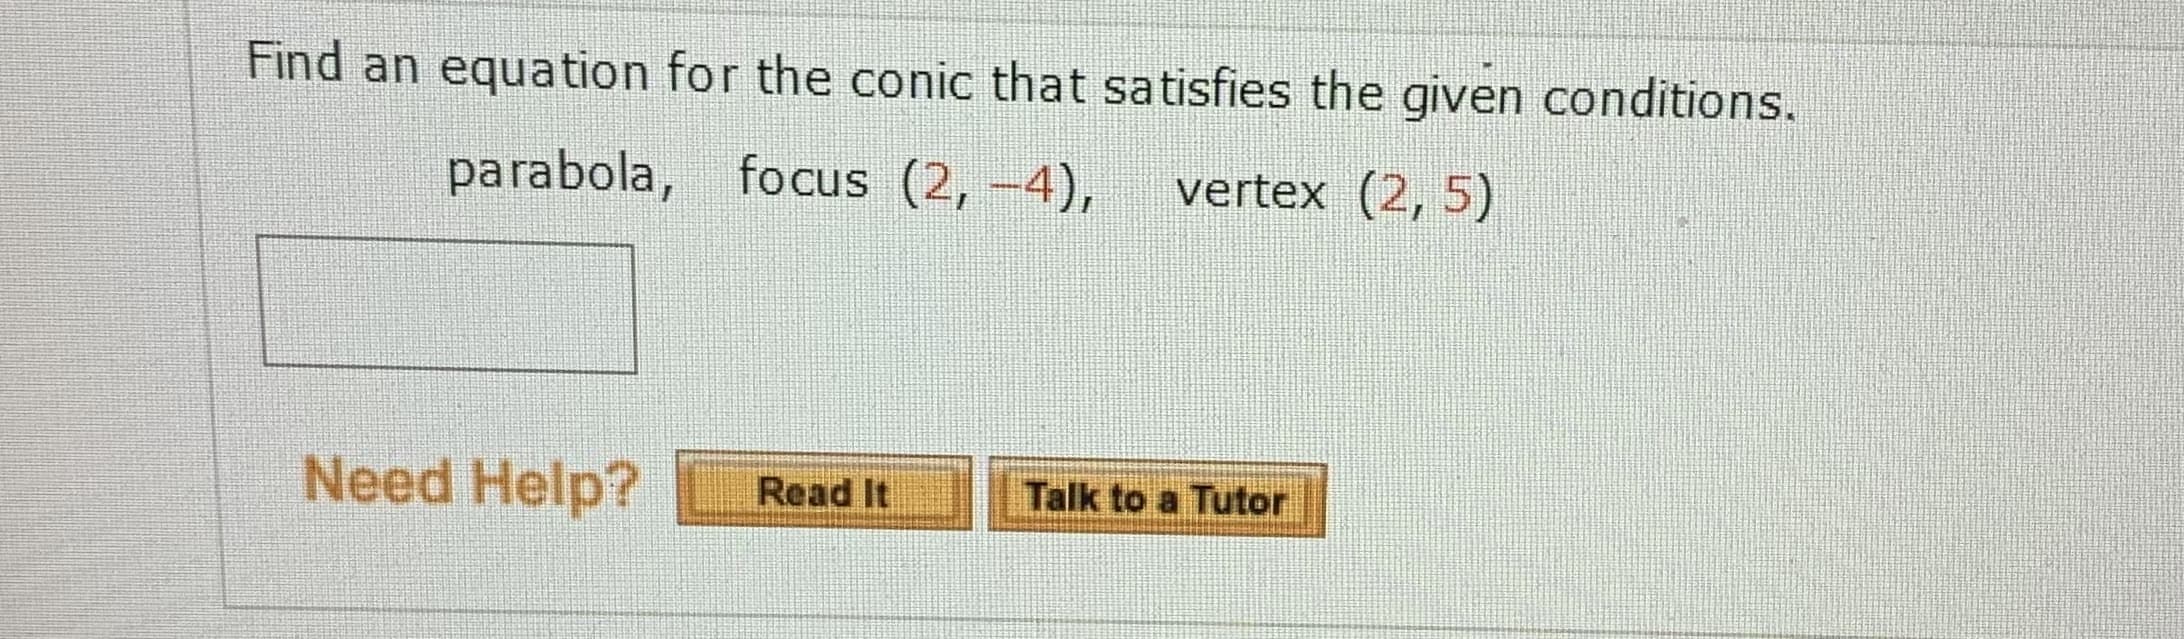 Find an equation for the conic that satisfies the given conditions.
parabola, focus (2, -4),
vertex (2, 5)
